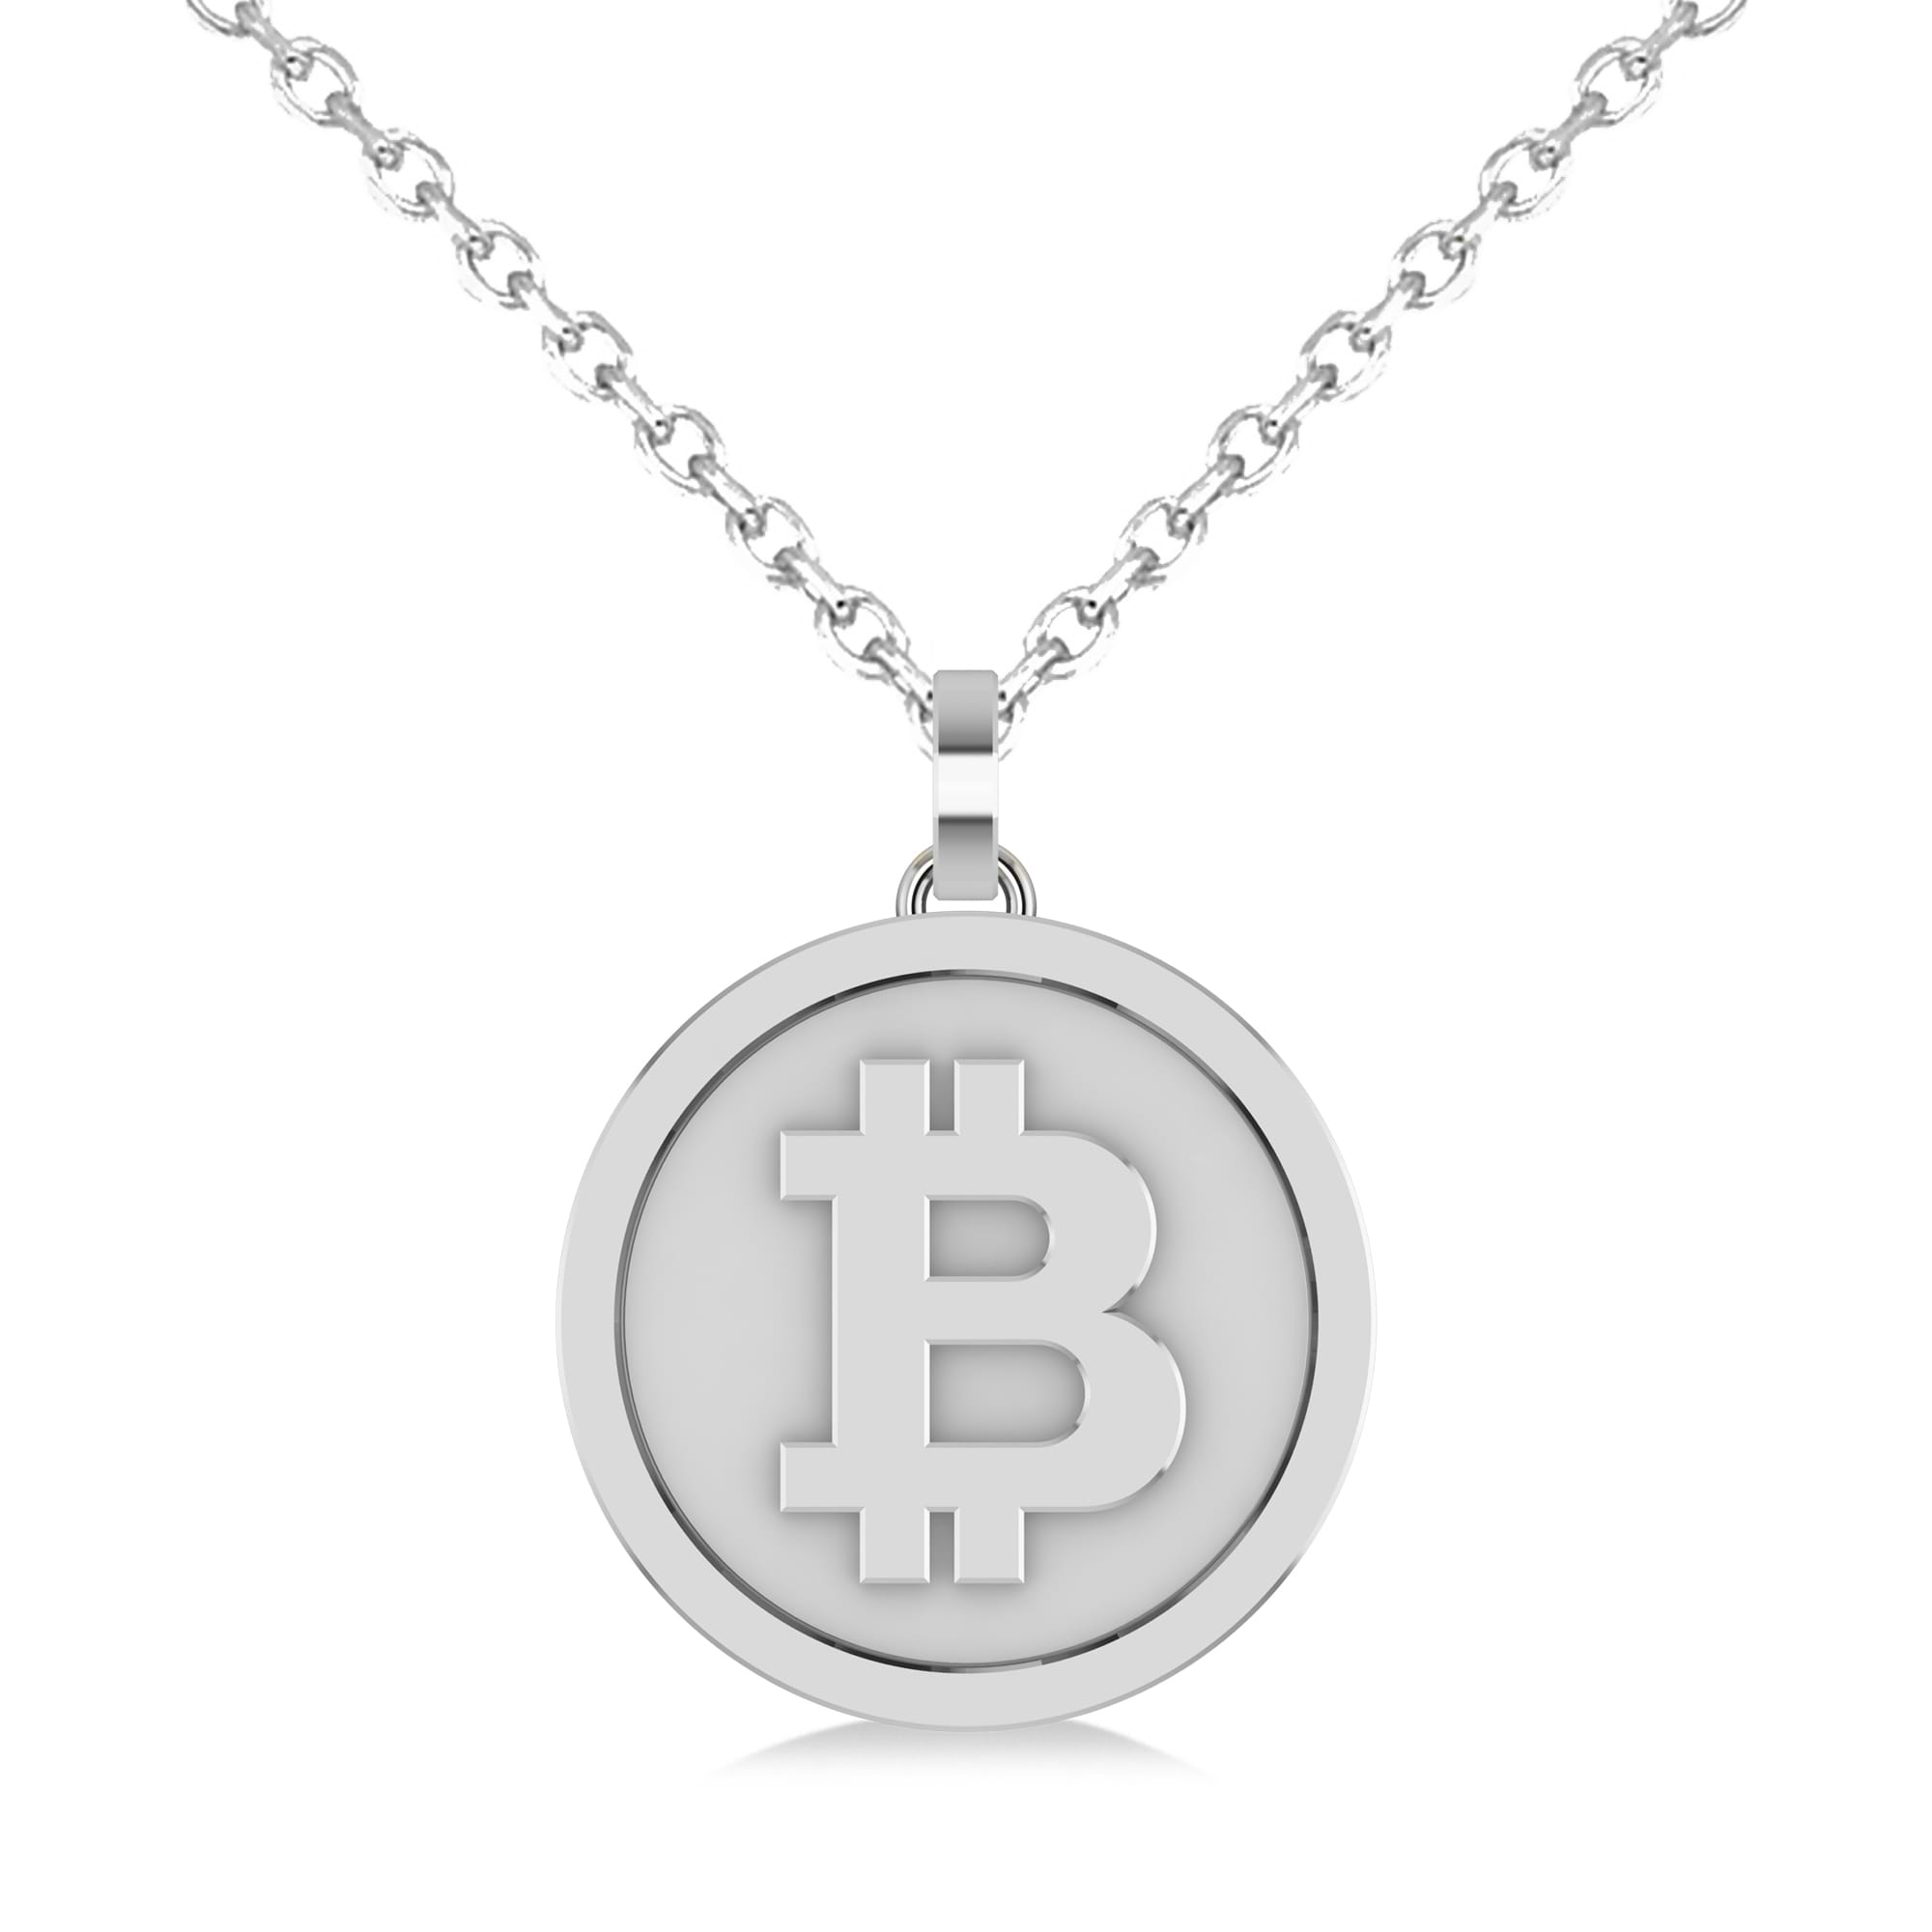 Large Cryptocurrency Bitcoin Pendant Necklace 14k White Gold